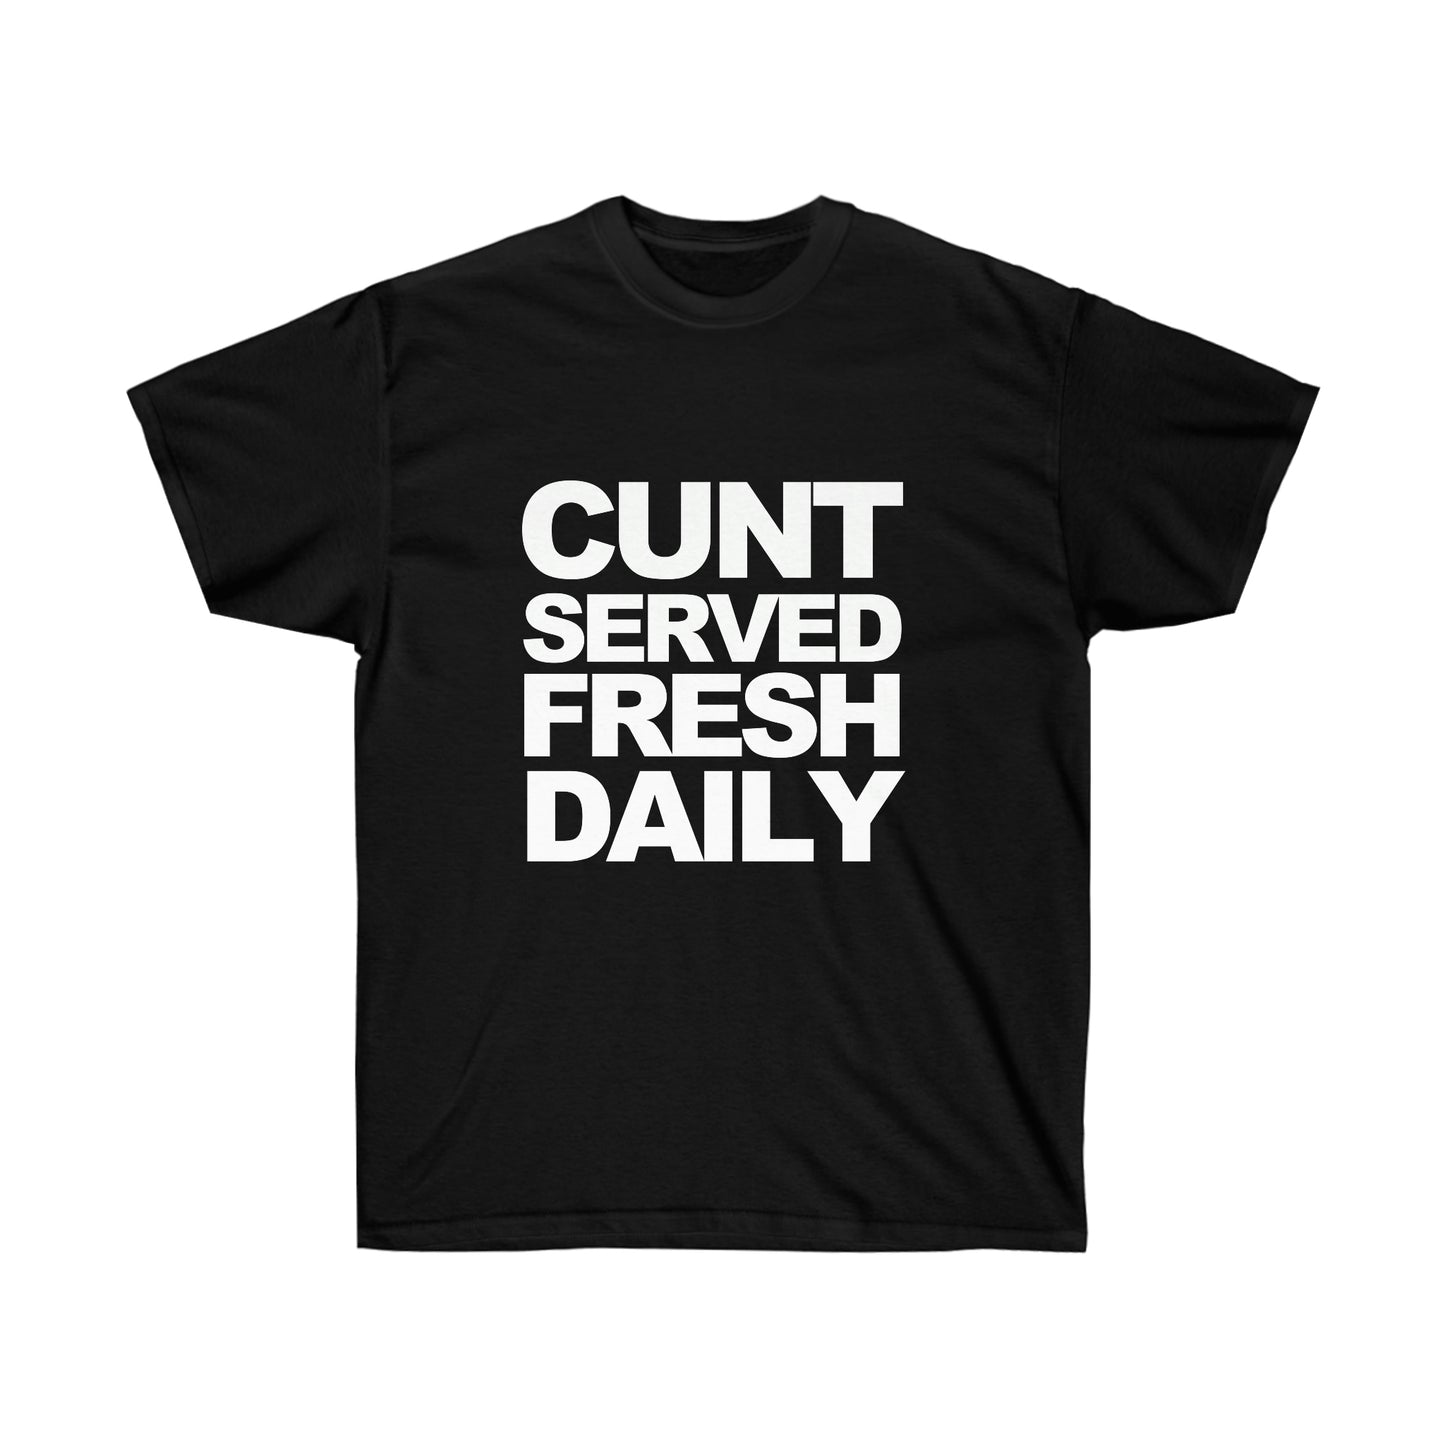 Cunt Served Fresh Daily Shirt, Y2k Aesthetic T-Shirt